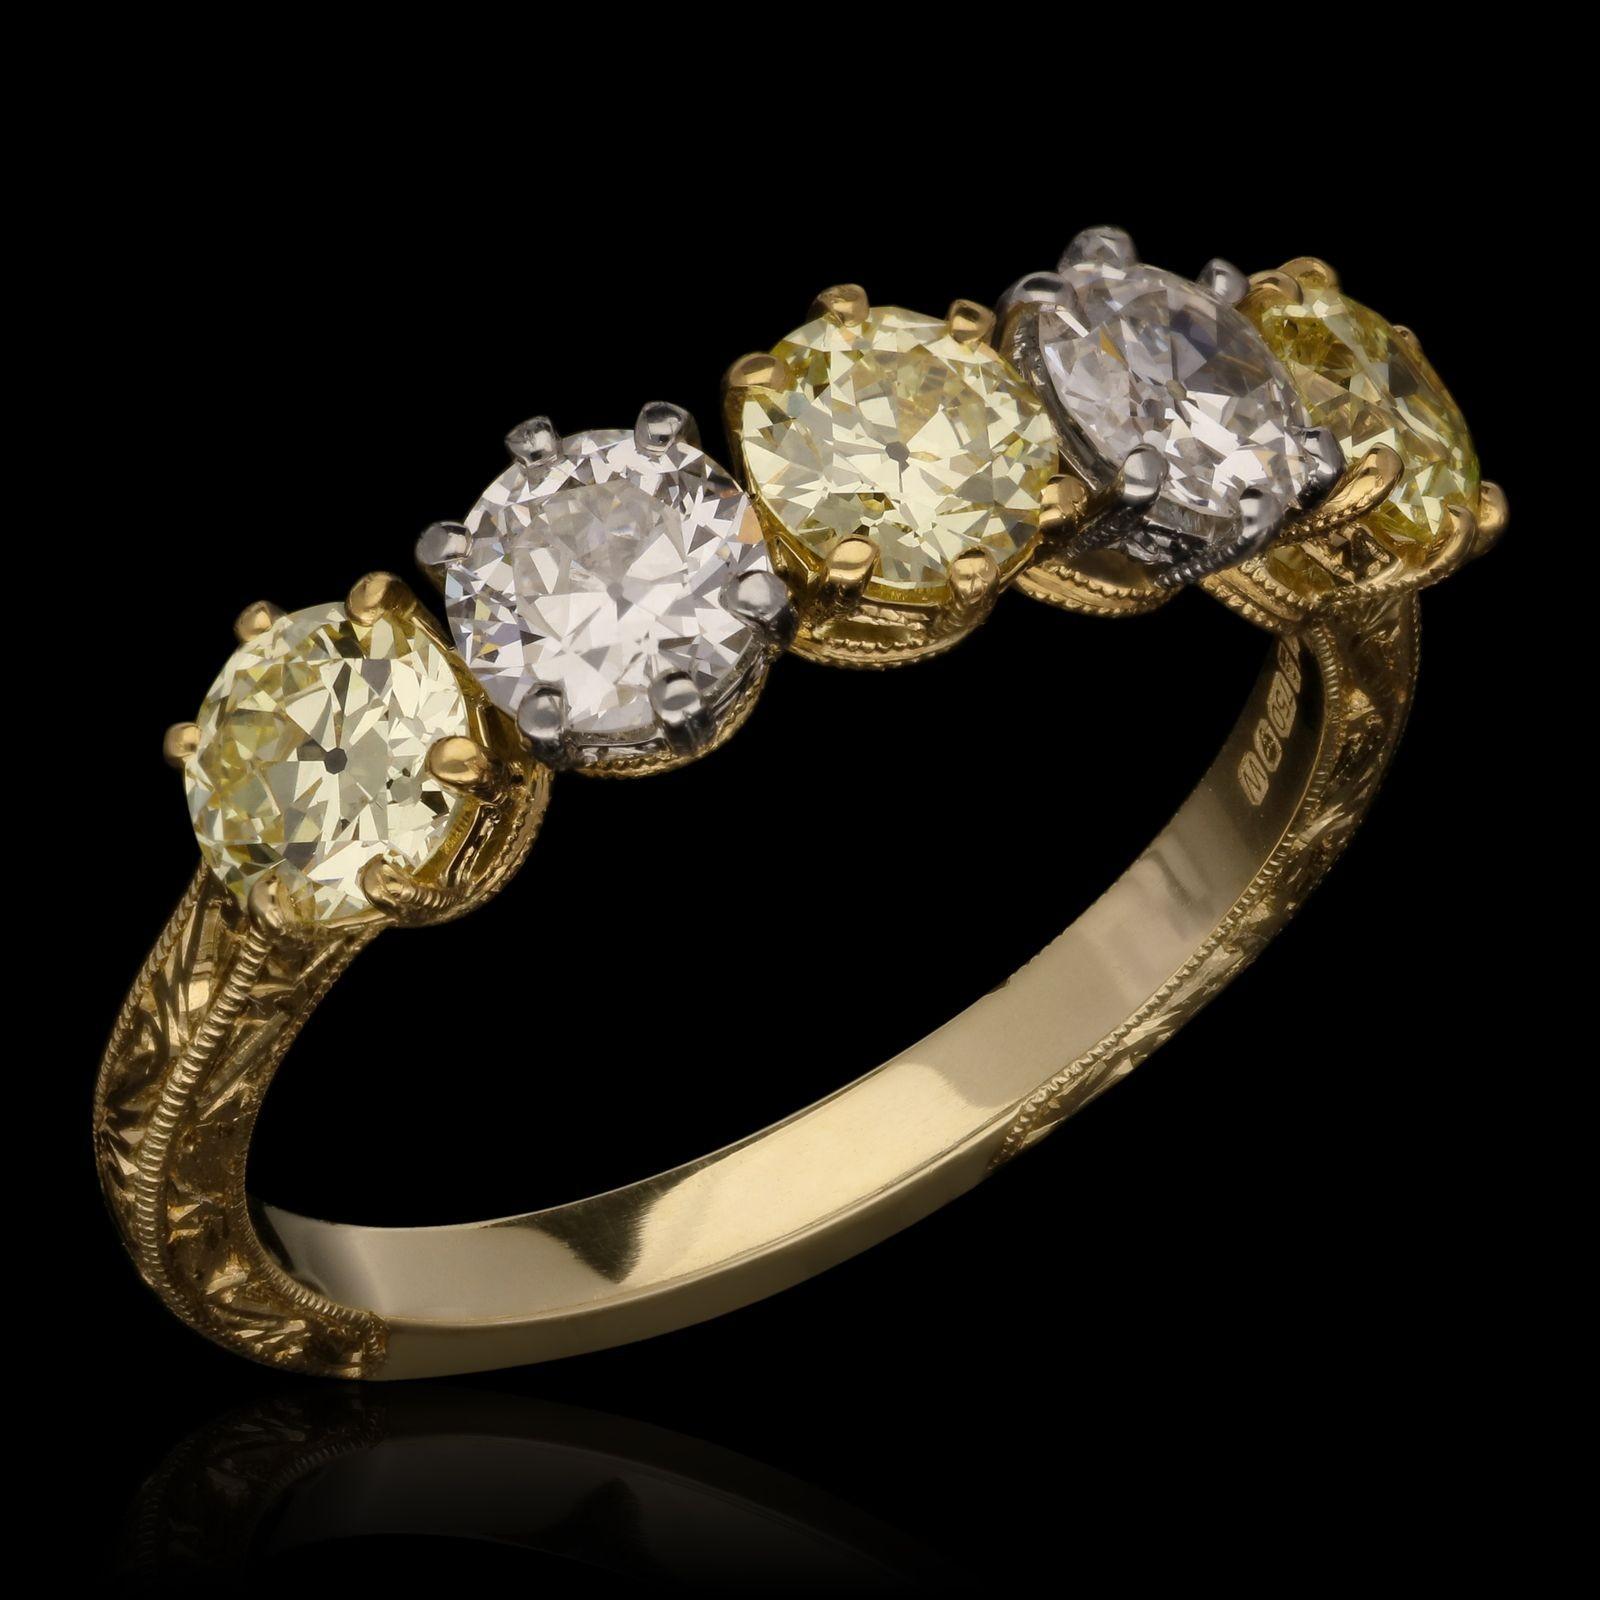 A beautiful yellow and white old cut diamond ring by Hancocks, set in a row with five old European brilliant cut diamonds weighing a combined total of 1.49cts, two G colour white stones and three Fancy Yellow colour stones, set alternately in either